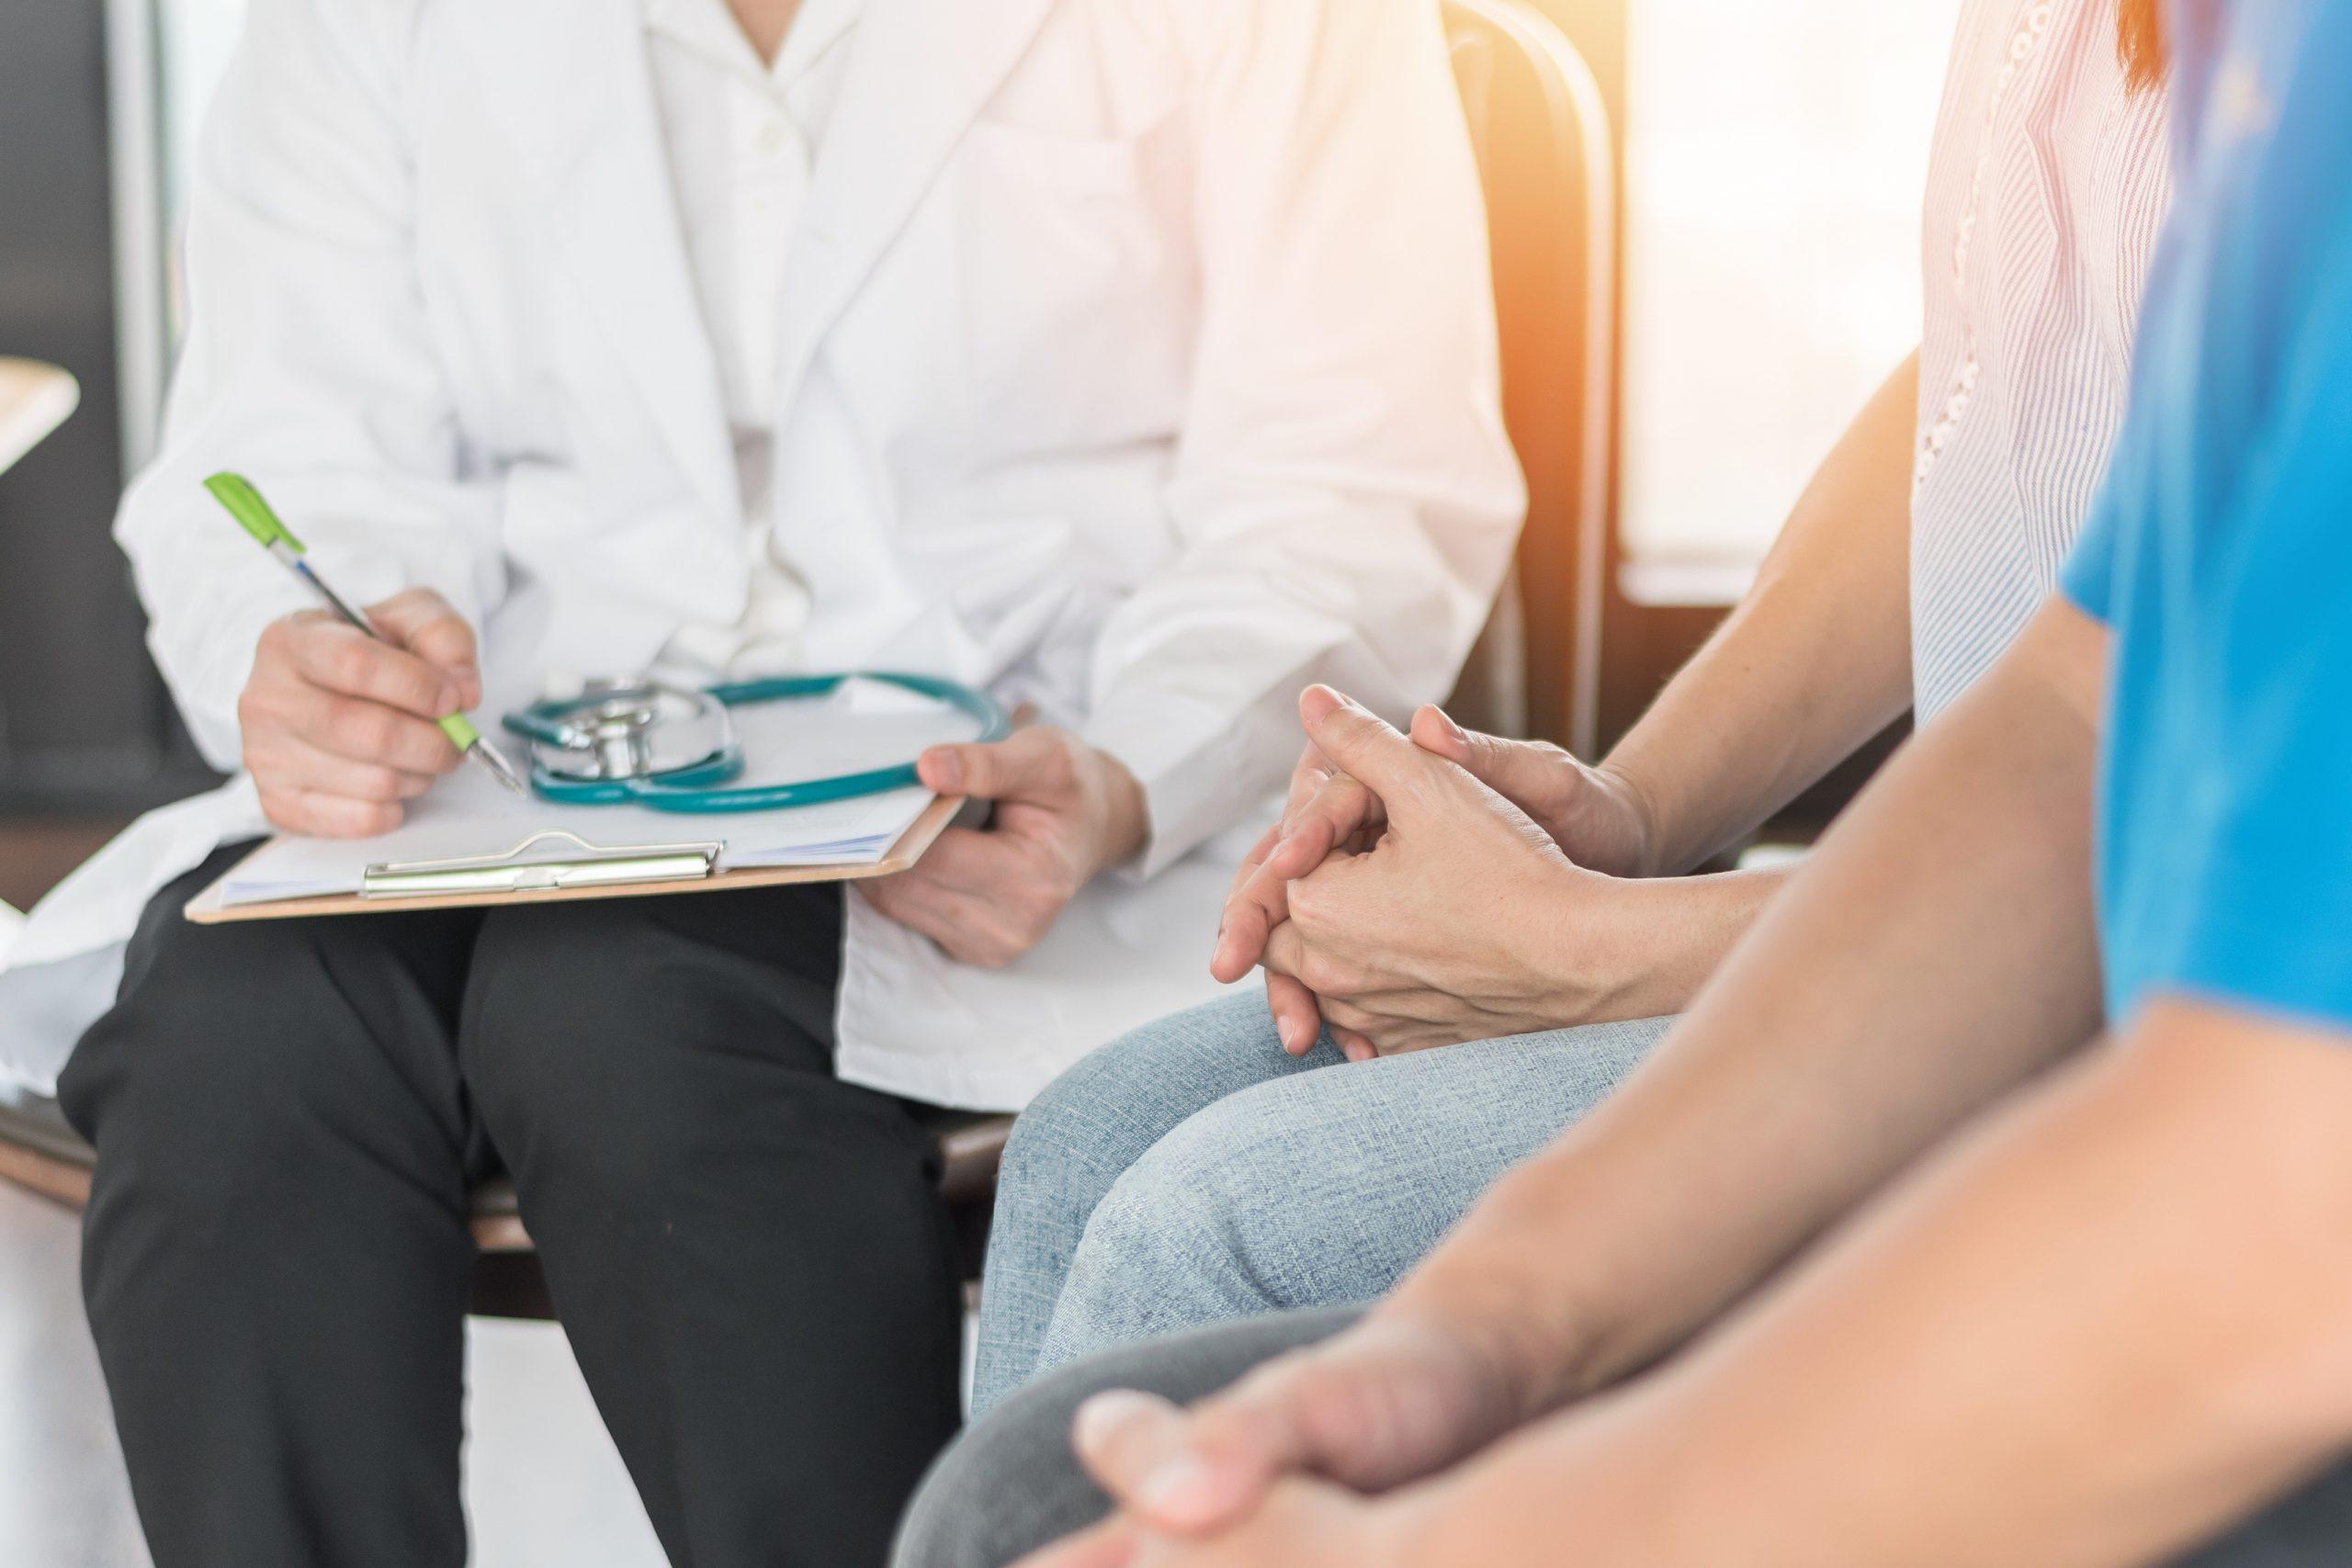 Patient couple consulting with doctor or psychologist on marriage counseling, family medical healthcare therapy, In vitro fertility IVF treatment for infertility, or psychotherapy session concept